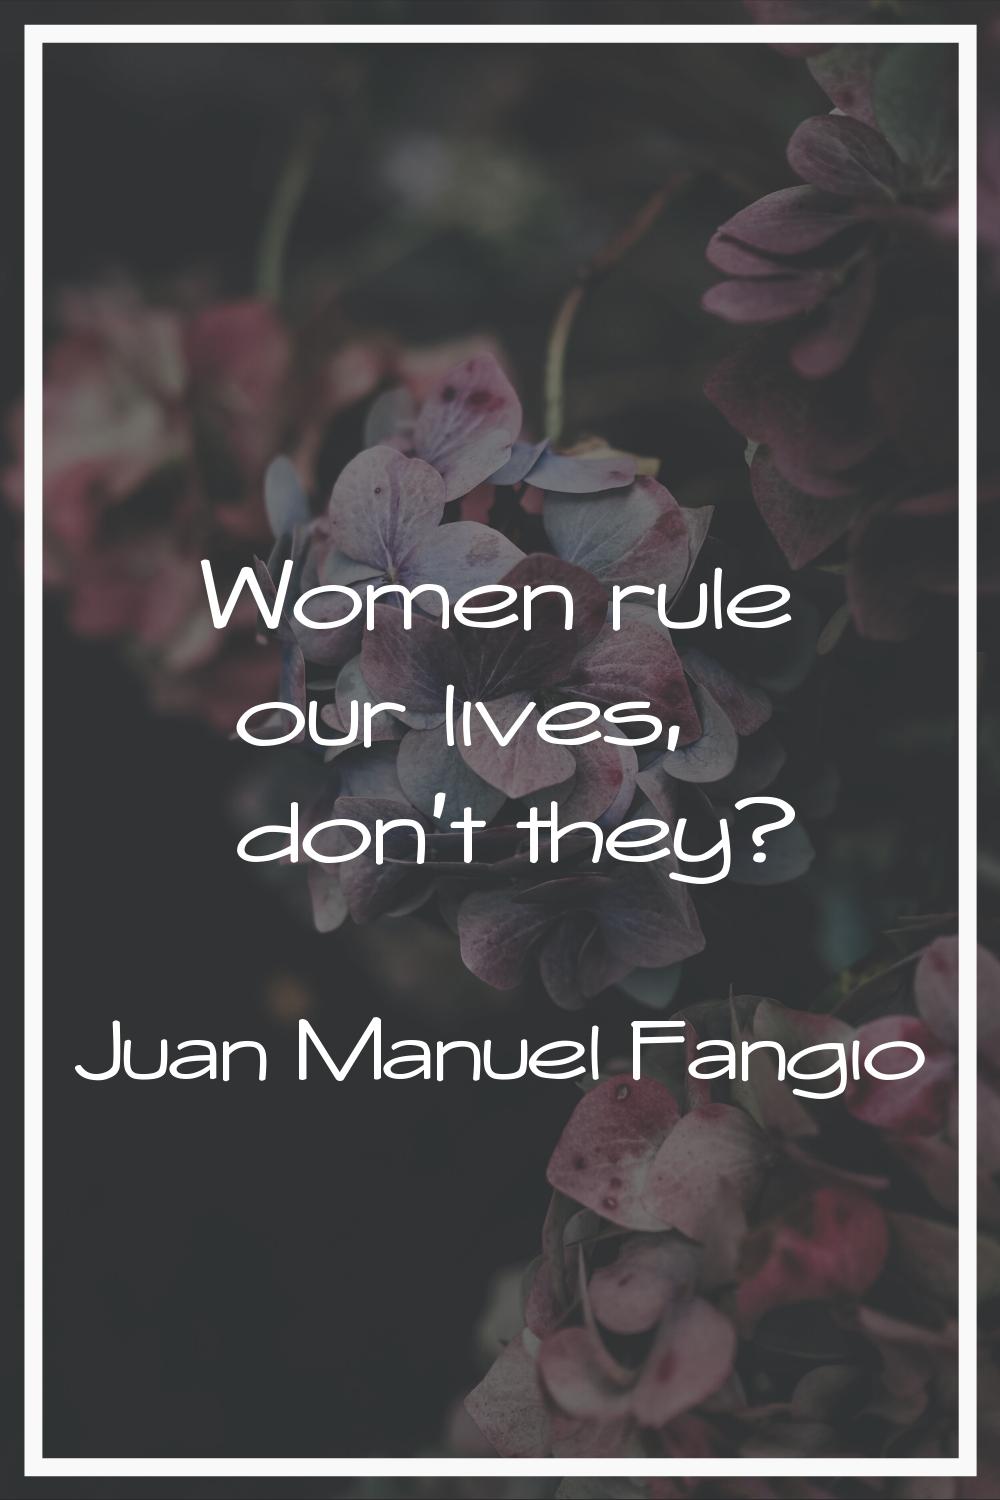 Women rule our lives, don't they?